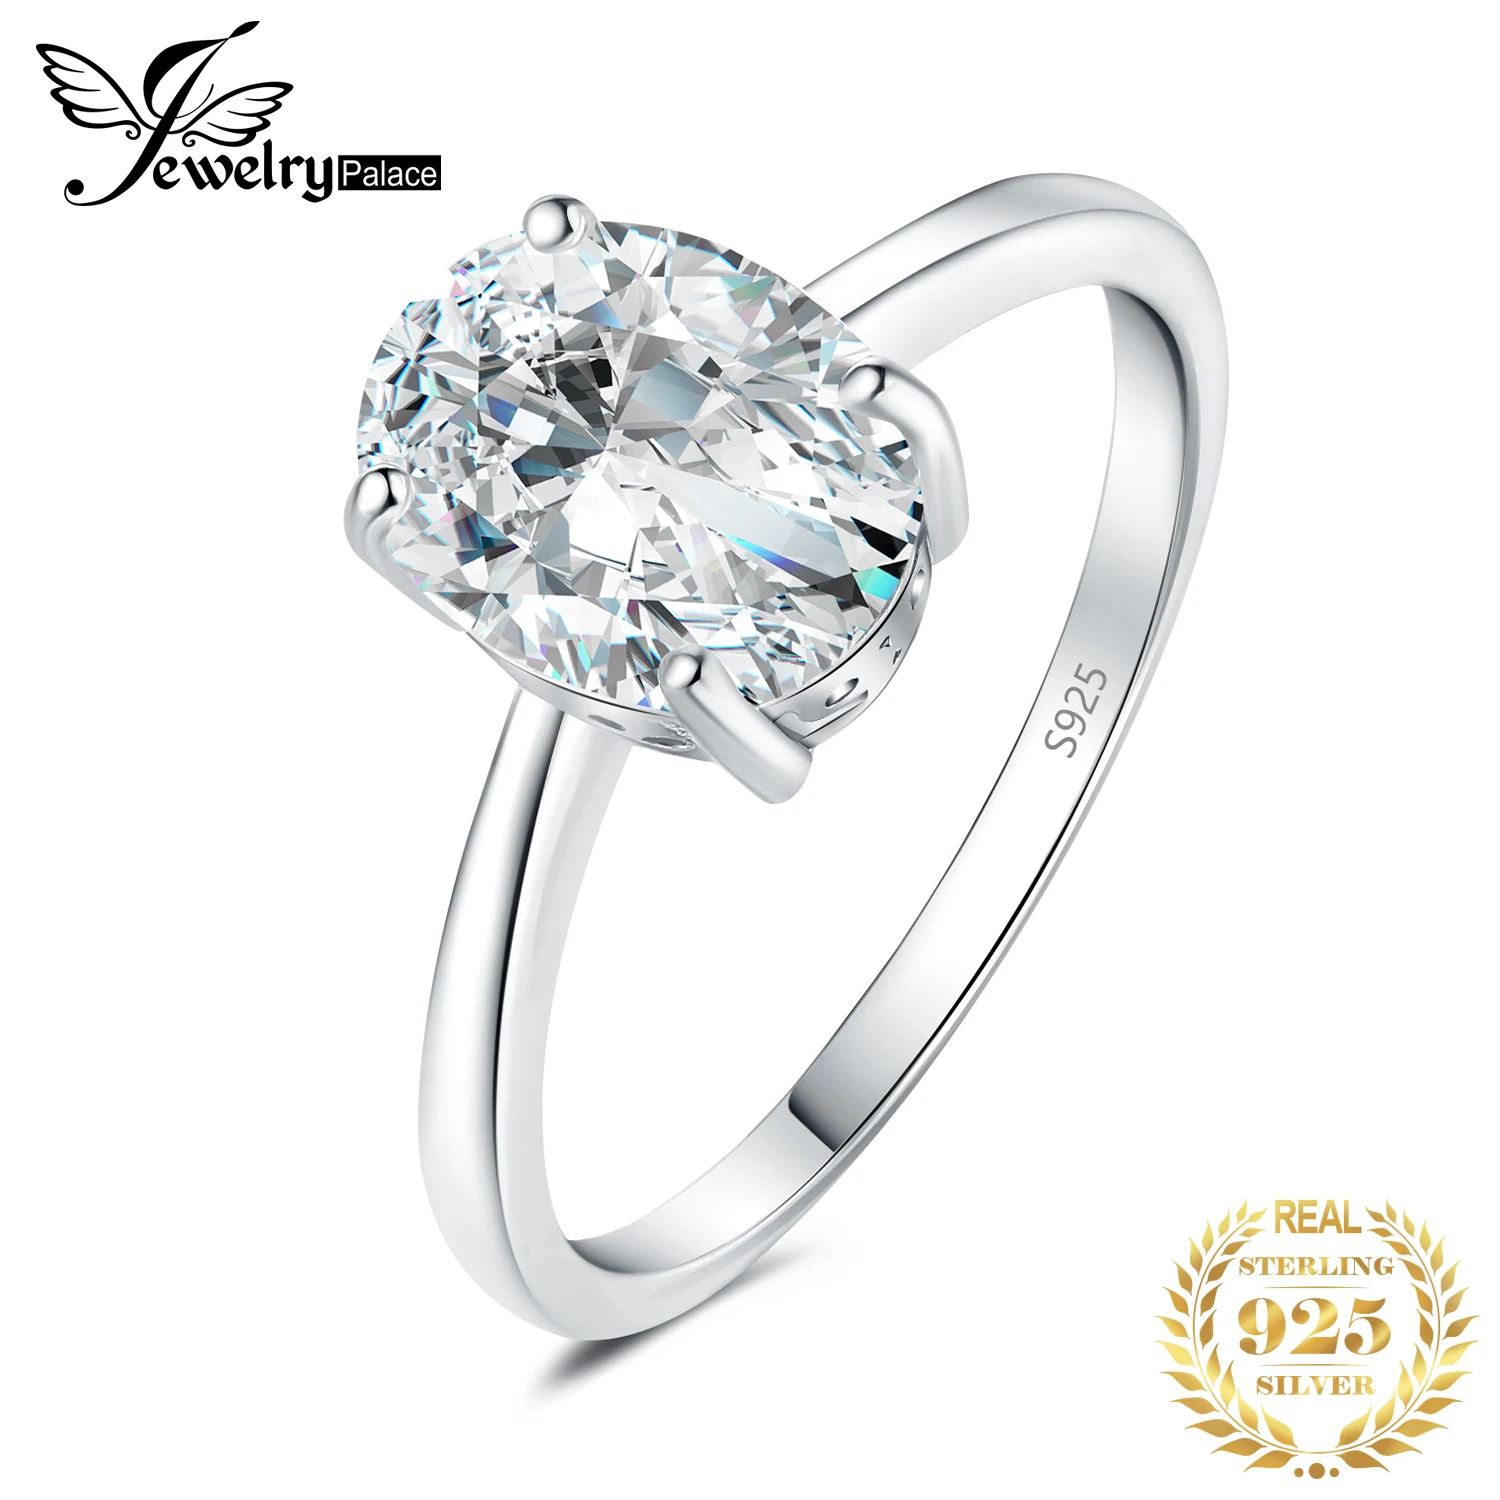 

JewelryPalace Moissanite D Color 1ct 2ct Oval S925 Sterling Silver Solitaire Wedding Engagement Ring for Woman